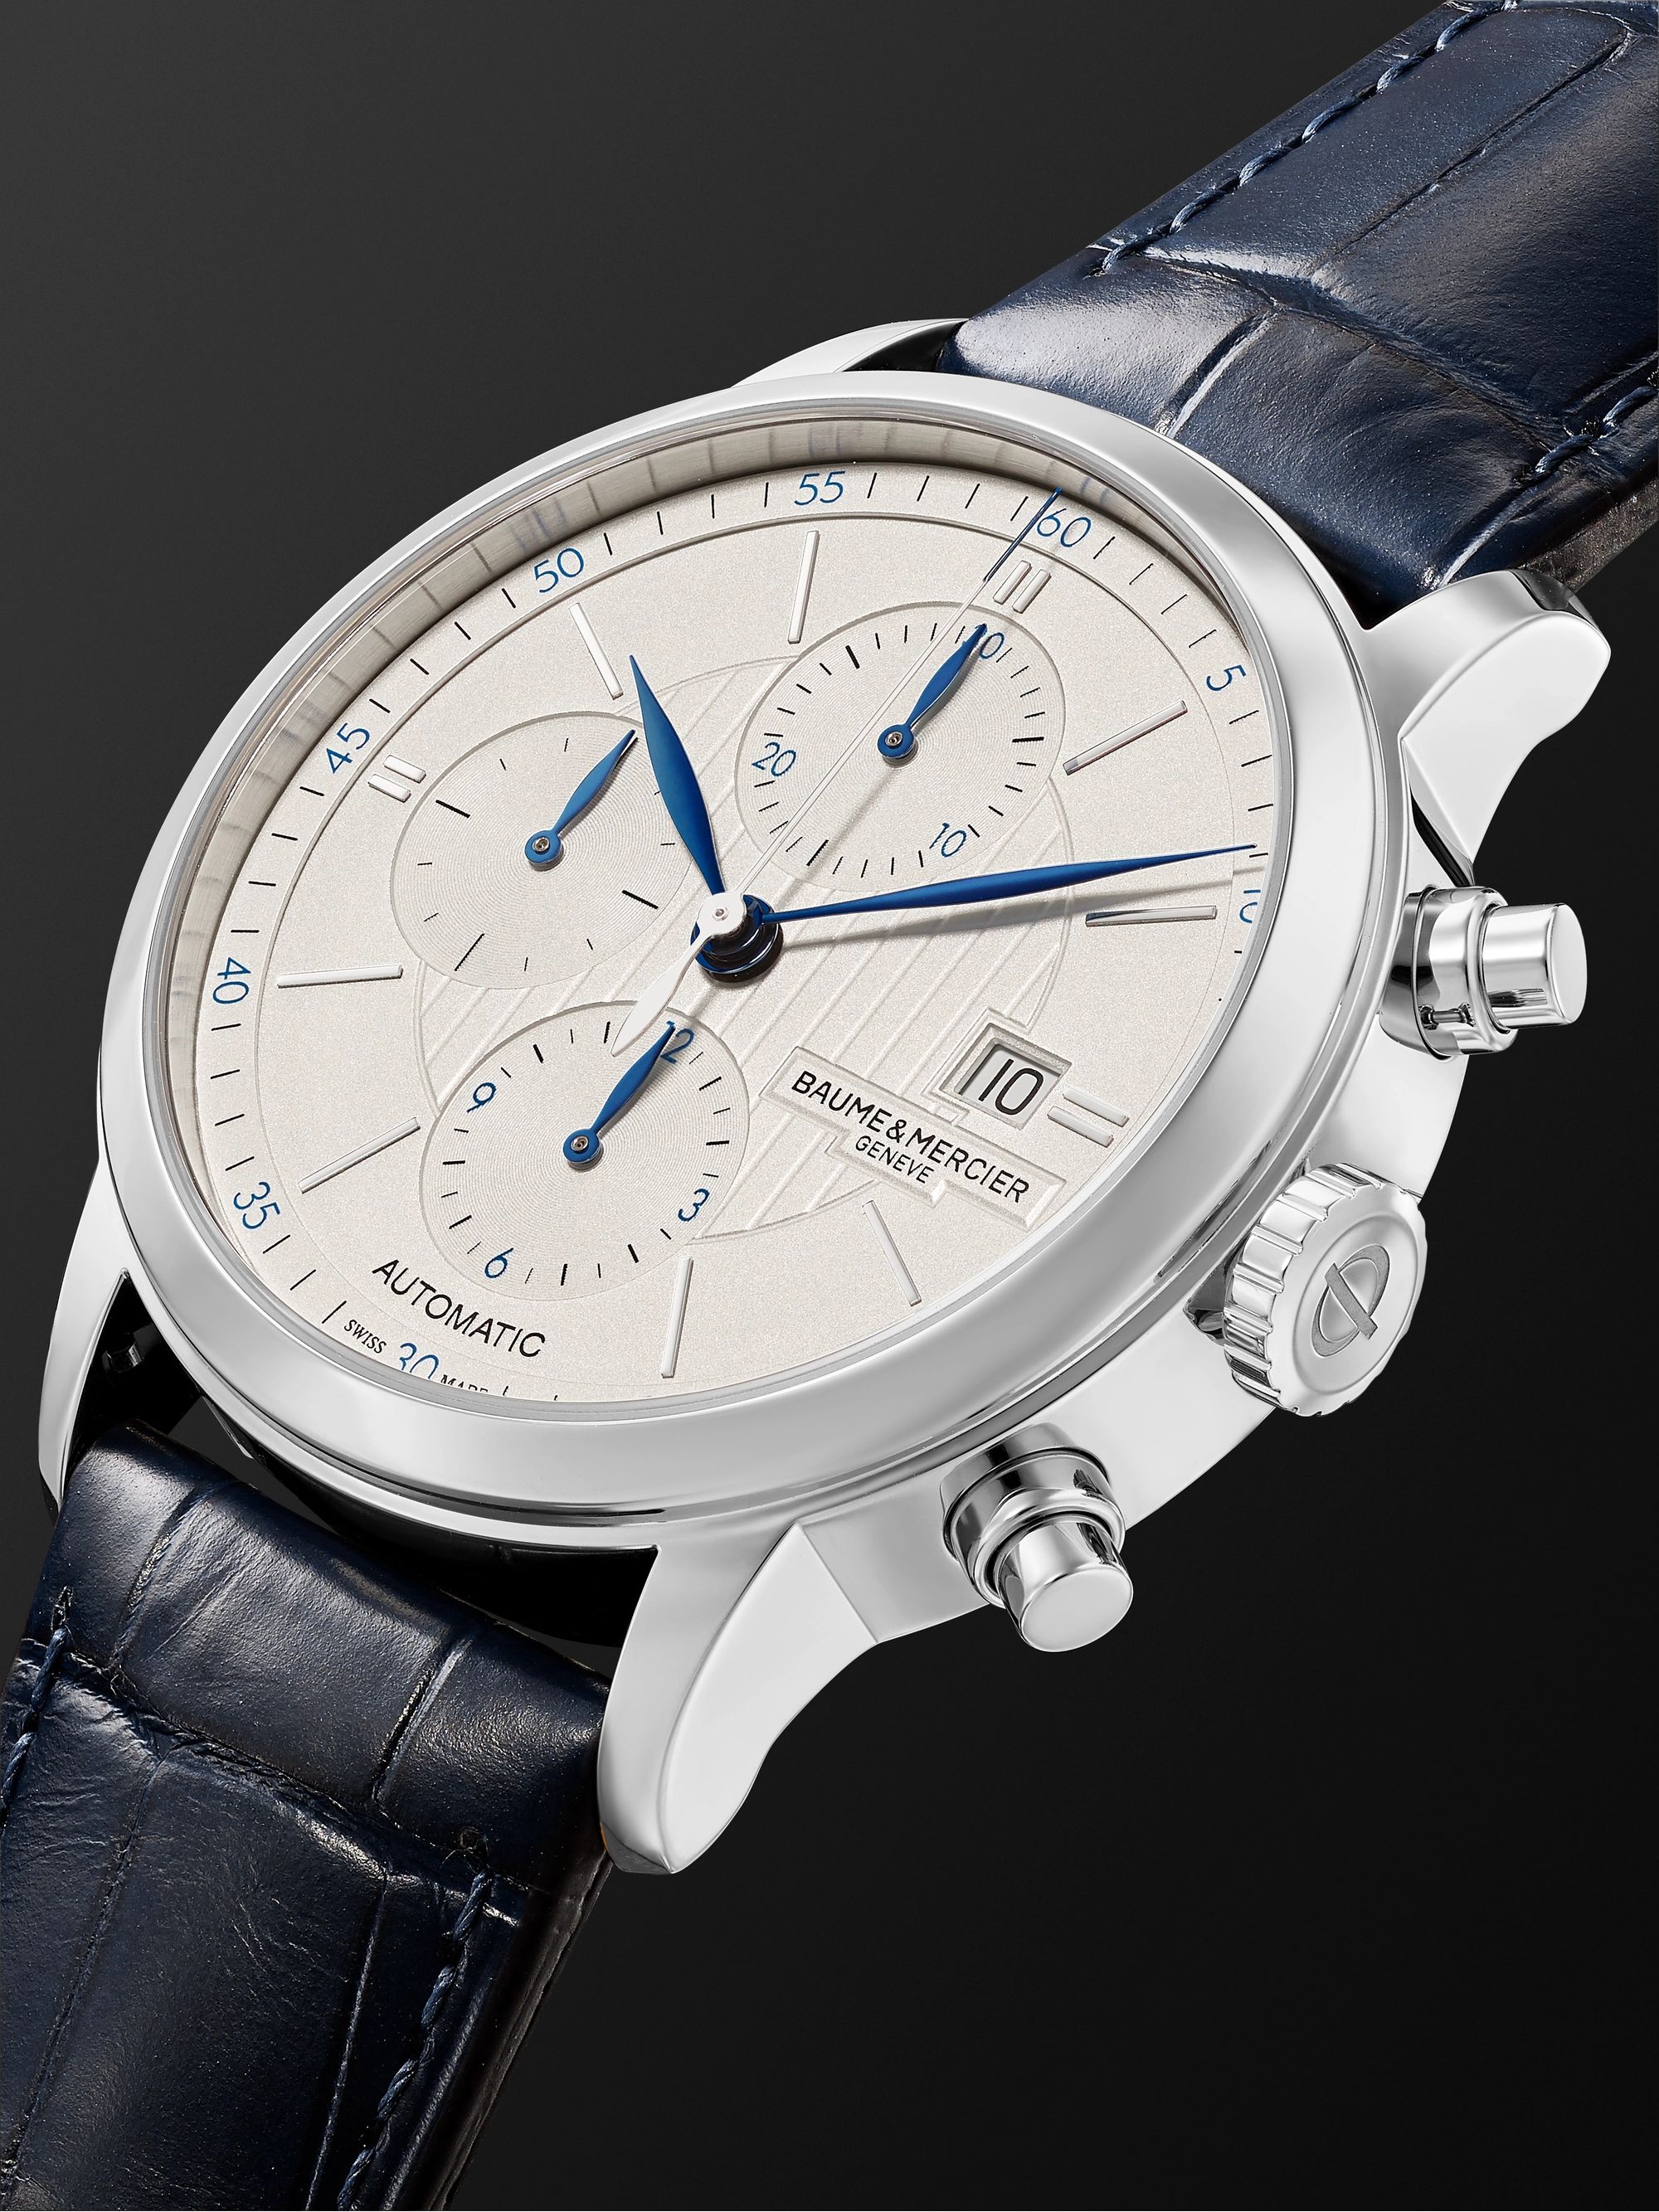 BAUME & MERCIER Classima Automatic Chronograph 42mm Steel and Alligator Watch, Ref. No. M0A10330